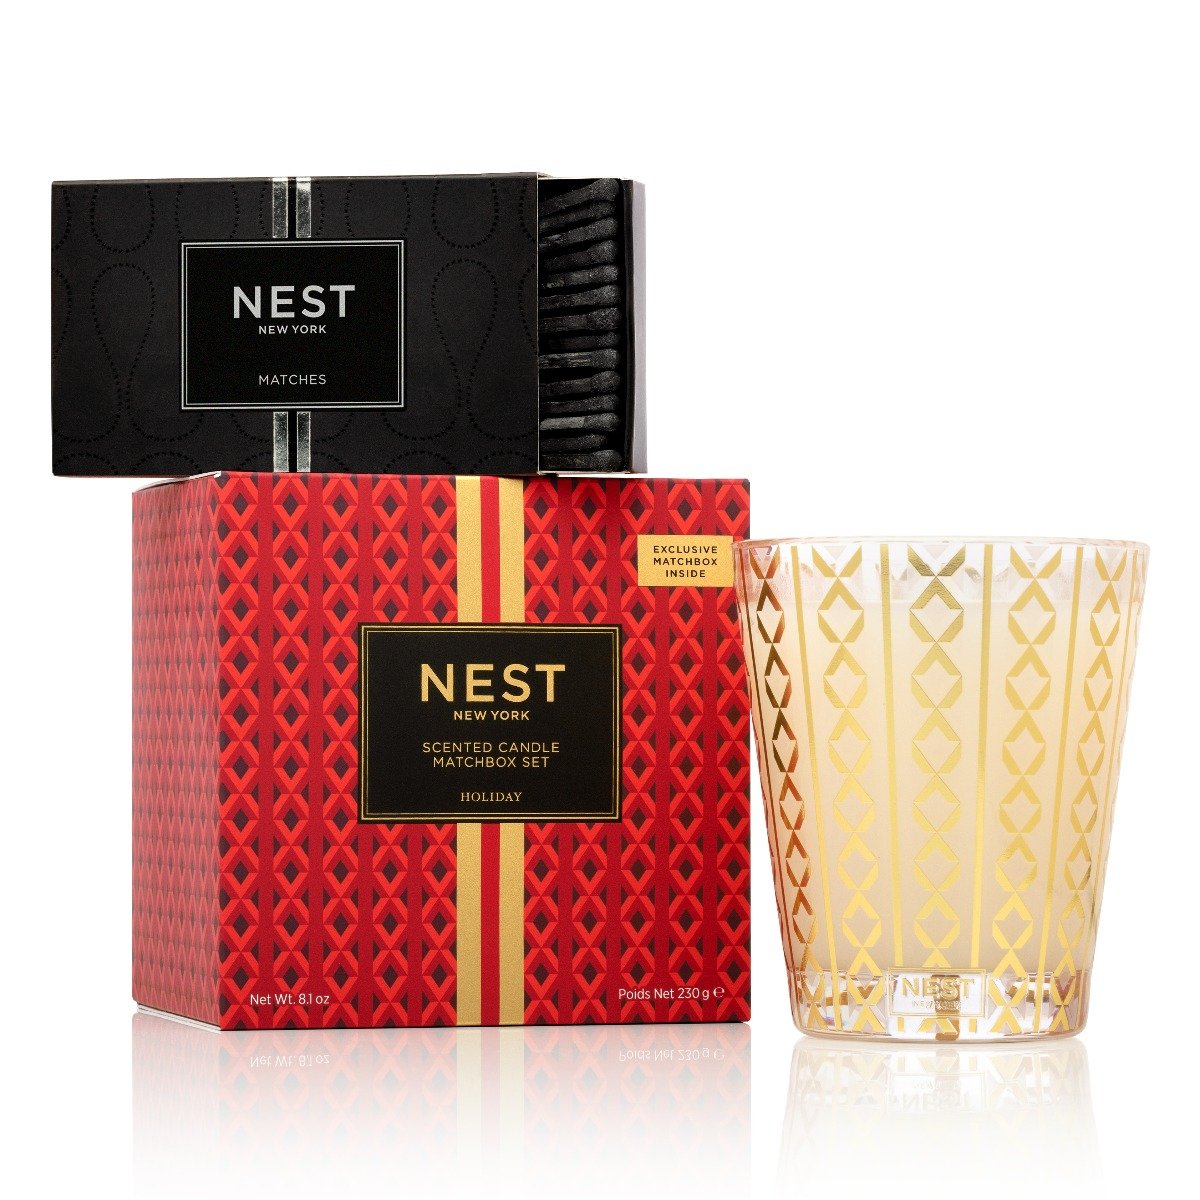 Holiday Classic Candle & Matchbook Set